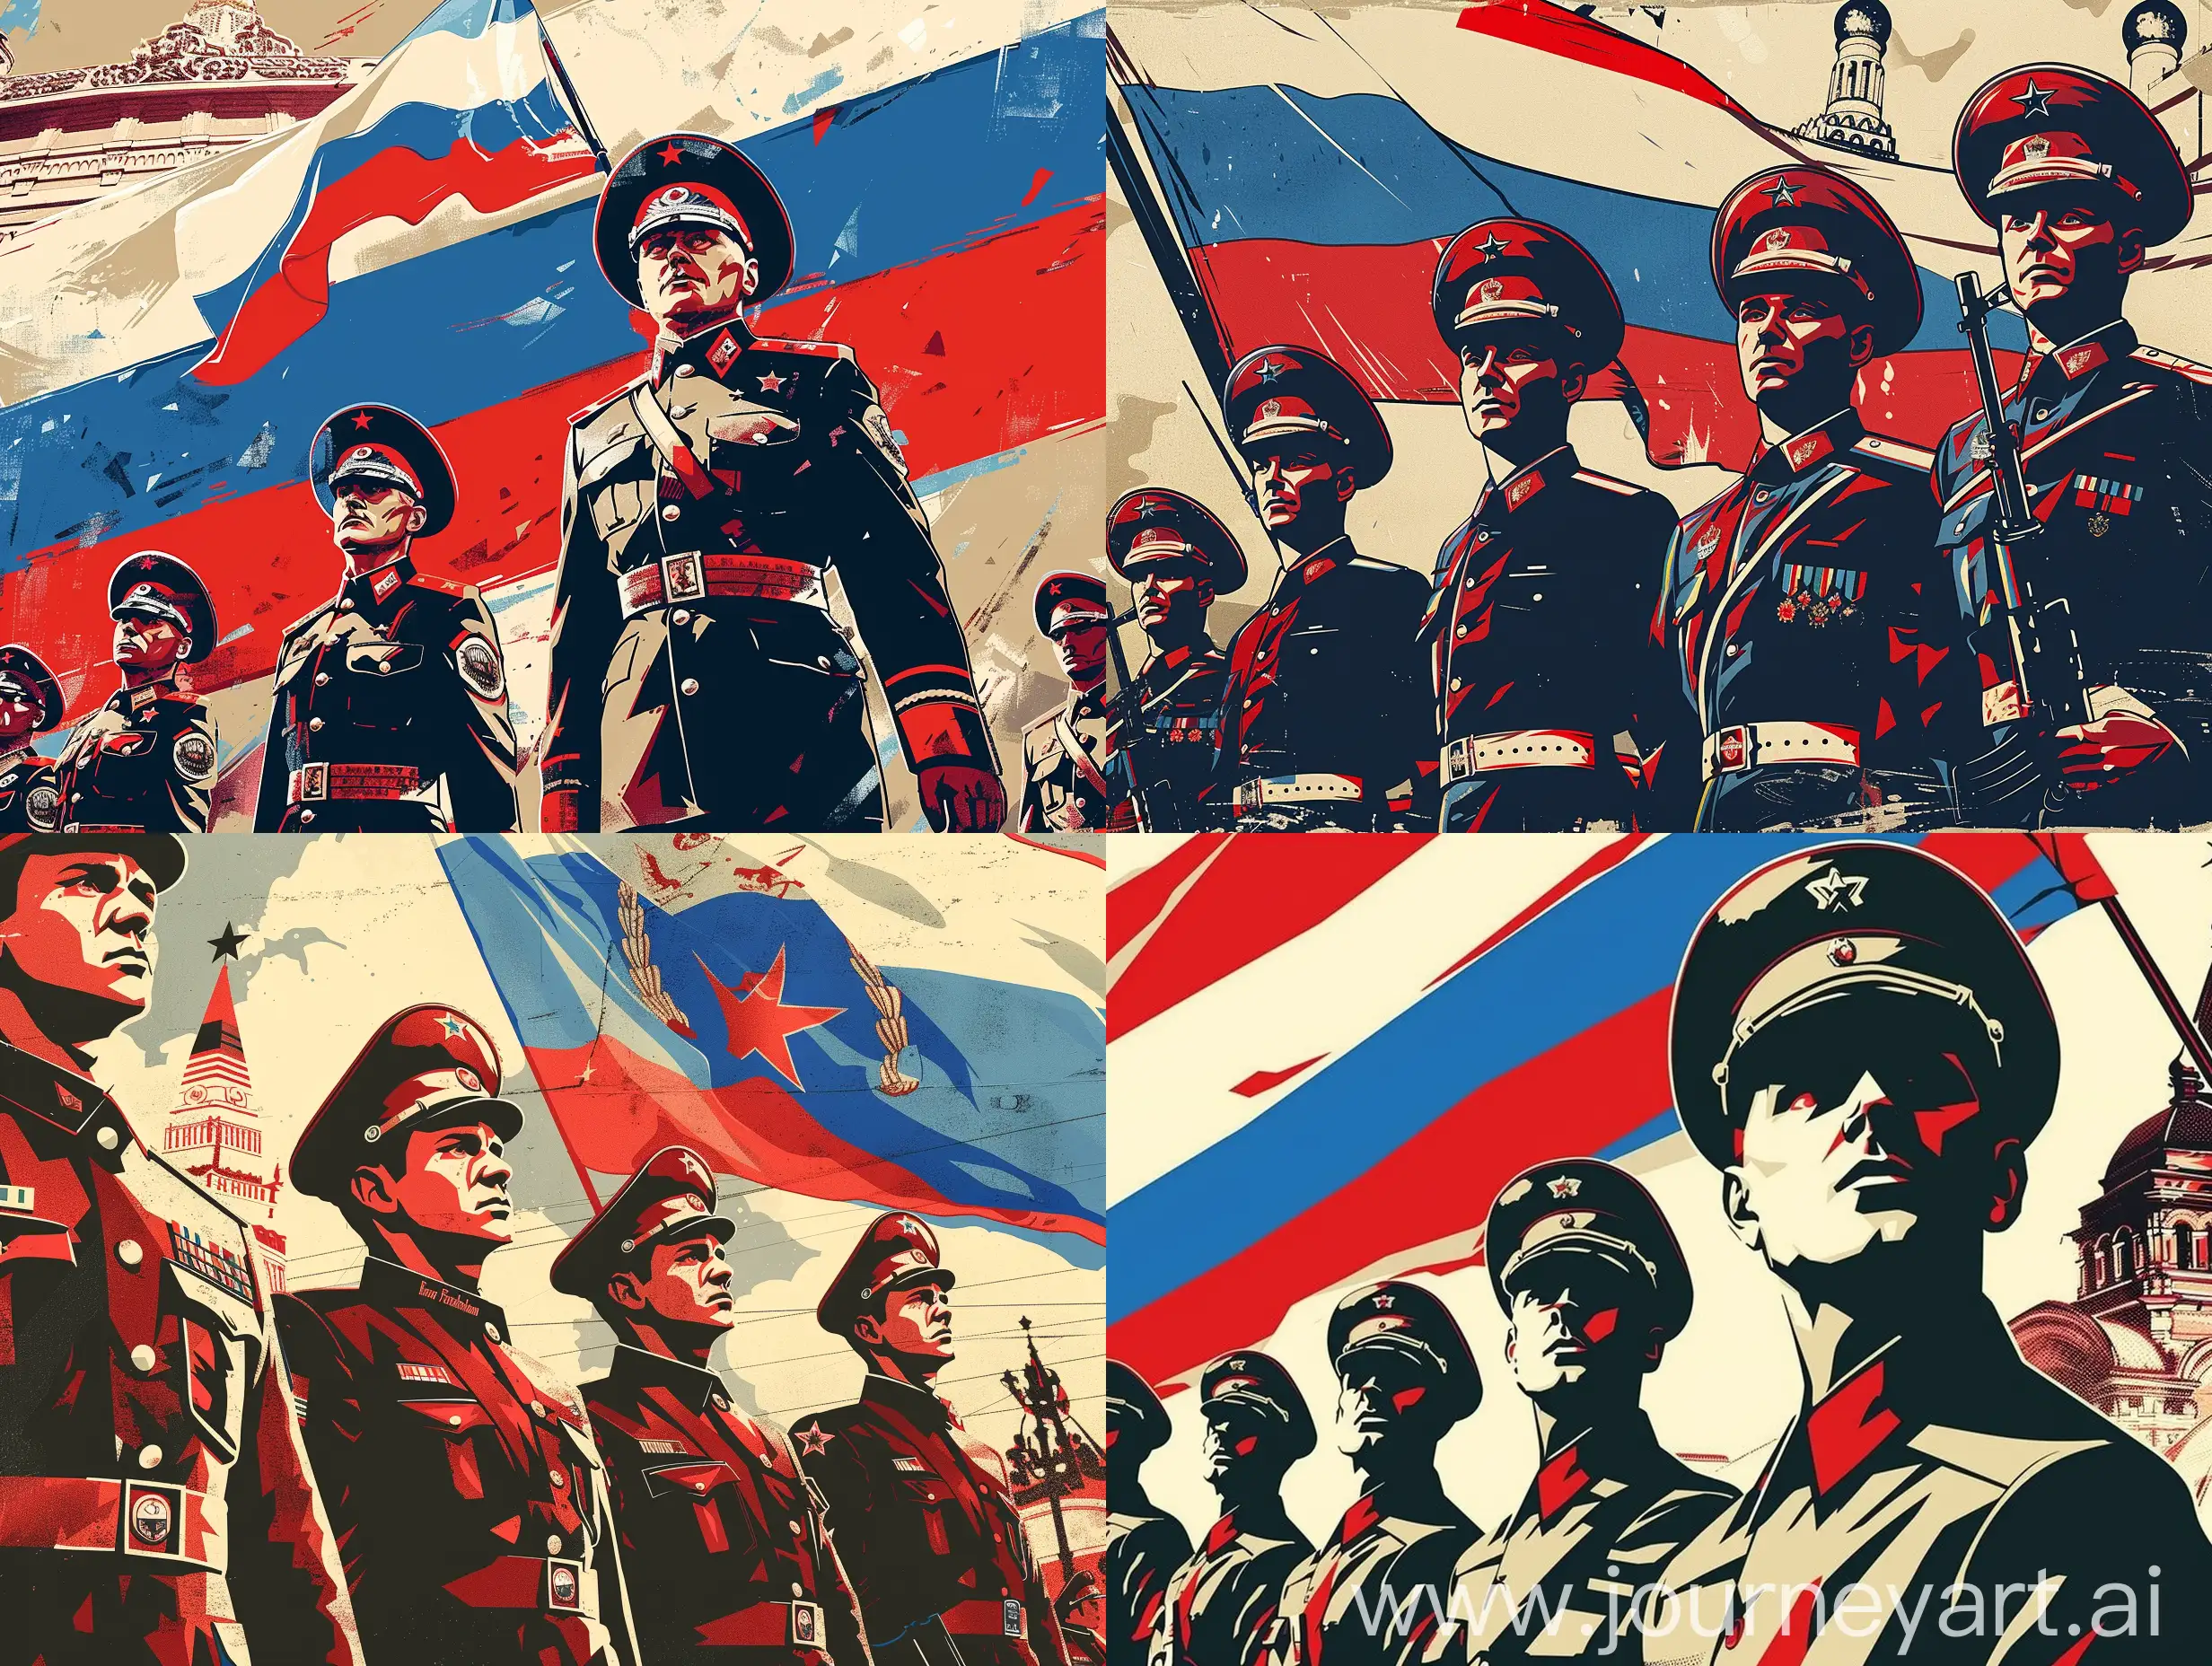 Poster design + Defender of the Fatherland Day celebration in Russia + depicting heroic Russian soldiers in uniform + in the style of socialist realism, propaganda art + red, white, and blue color palette + bold and impactful composition, iconic symbols of patriotism, Russian flag under the Kiev 